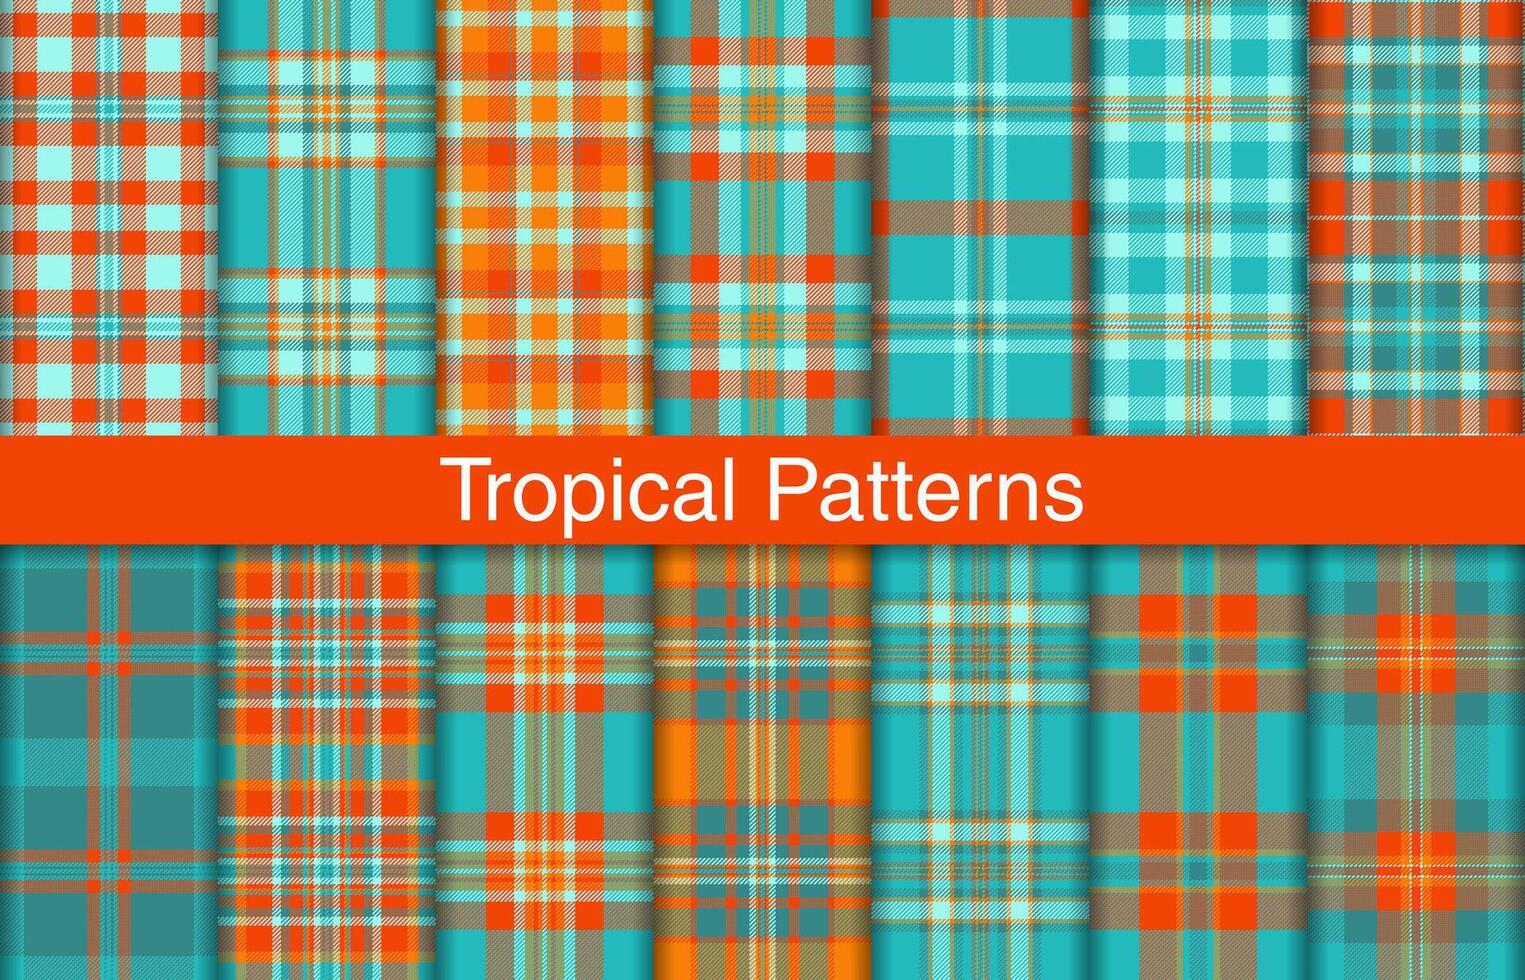 Tropical plaid bundles, textile design, checkered fabric pattern for shirt, dress, suit, wrapping paper print, invitation and gift card. vector